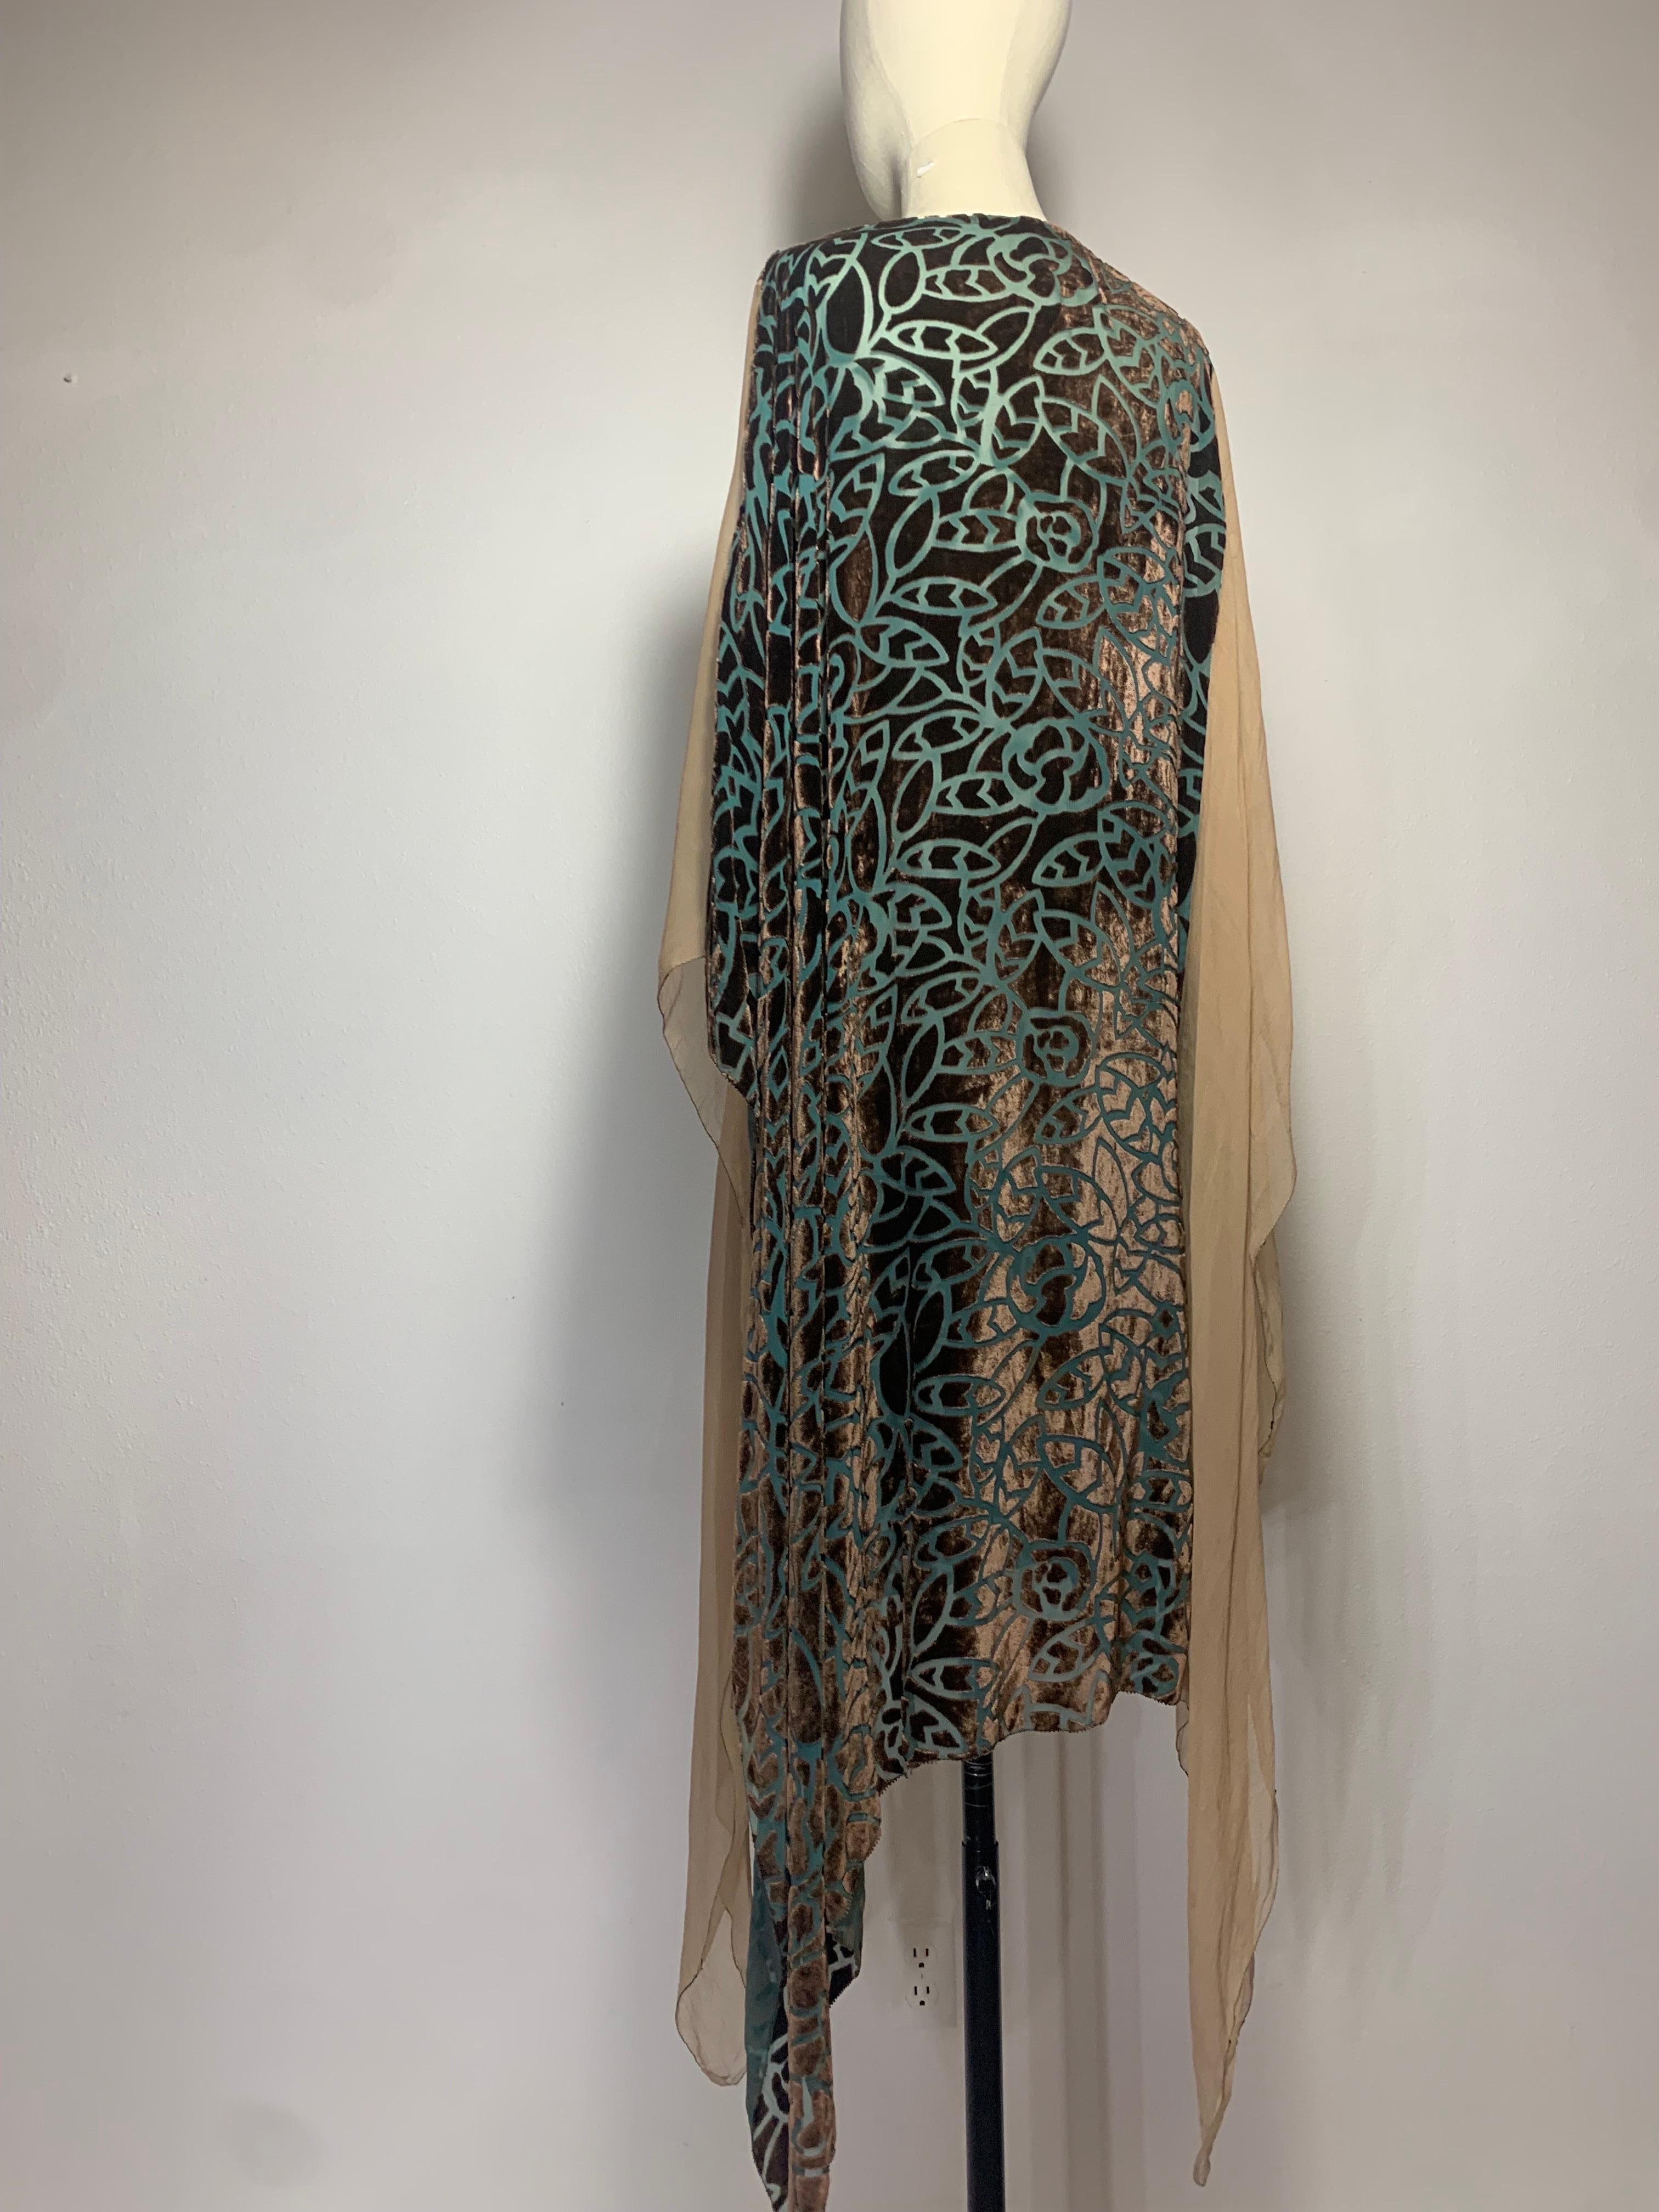 1920s Patina Green & Taupe Devore Velvet Art Deco Tunic w Stylized Leaf Pattern For Sale 11